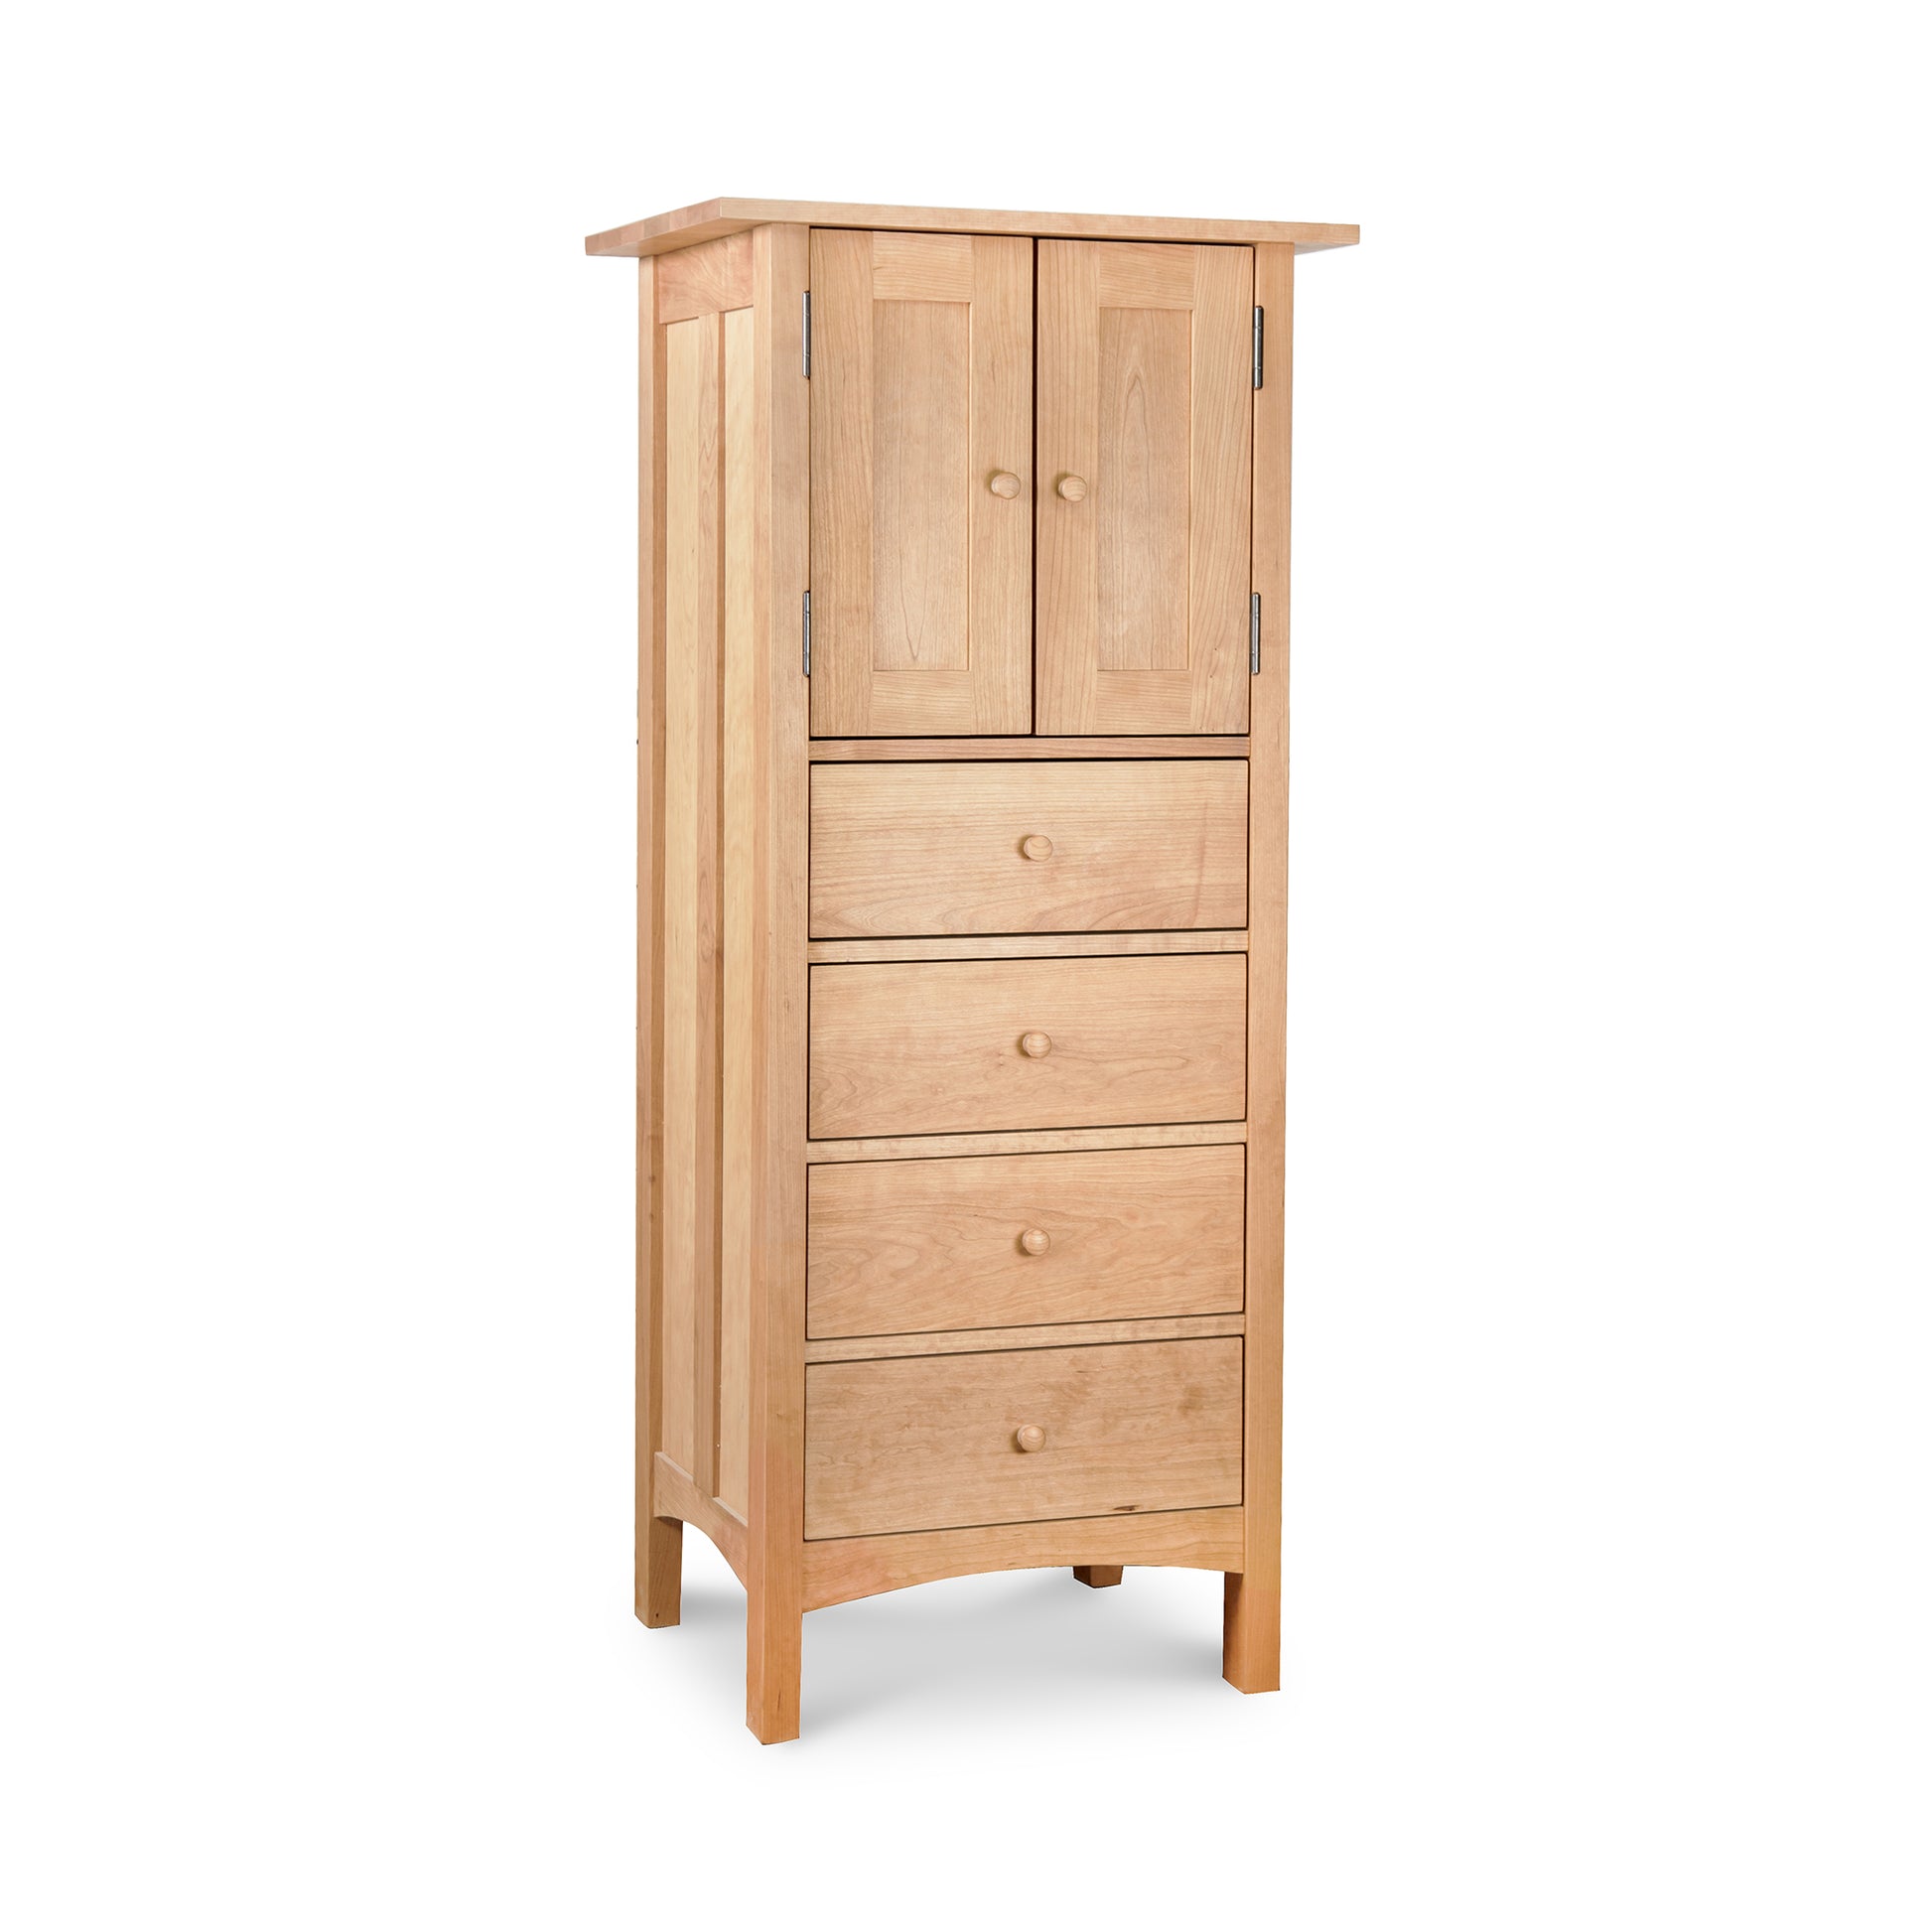 A Burlington Shaker tall wooden cabinet with drawers on top, serving as a Vermont Furniture Designs solid wood tall storage chest.